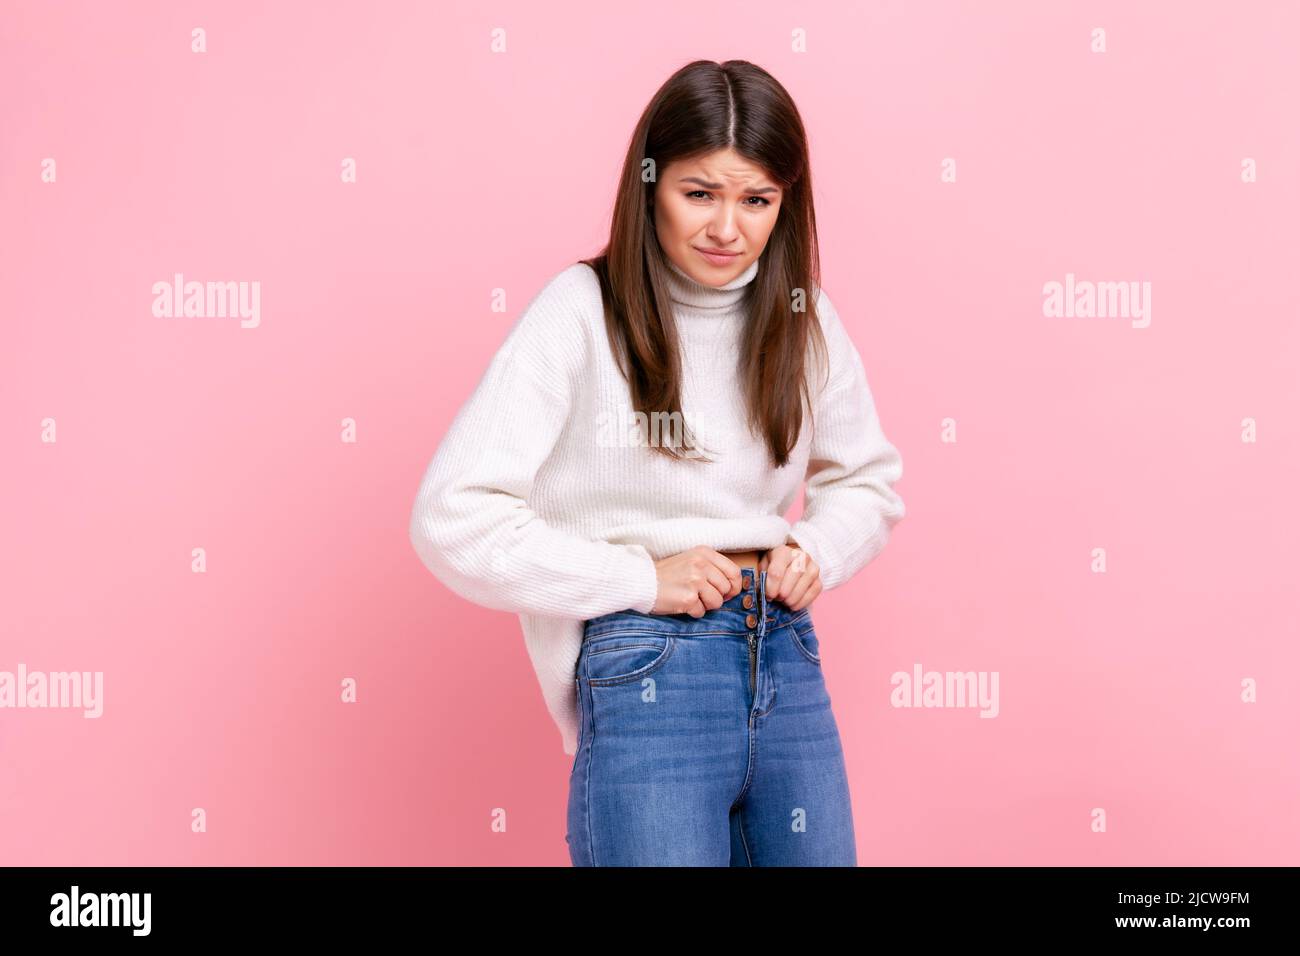 Portrait of unhappy sad young adult woman gaining weight, cant wearing her jeans, being overweight, wearing white casual style sweater. Indoor studio shot isolated on pink background. Stock Photo